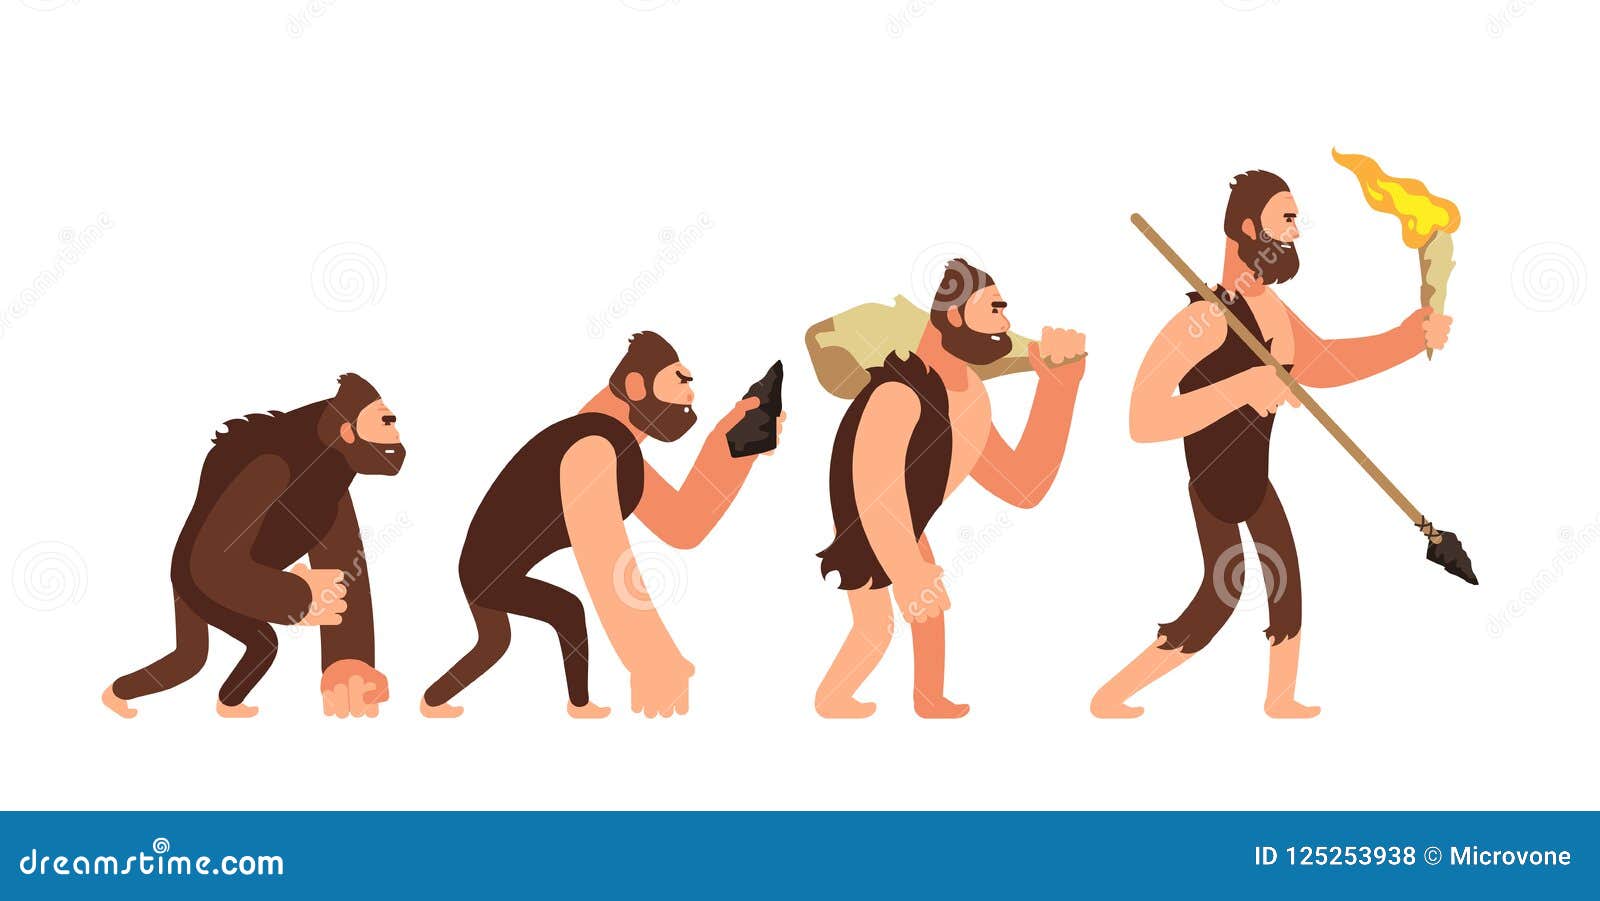 theory of human evolution. man development stages. anthropology  